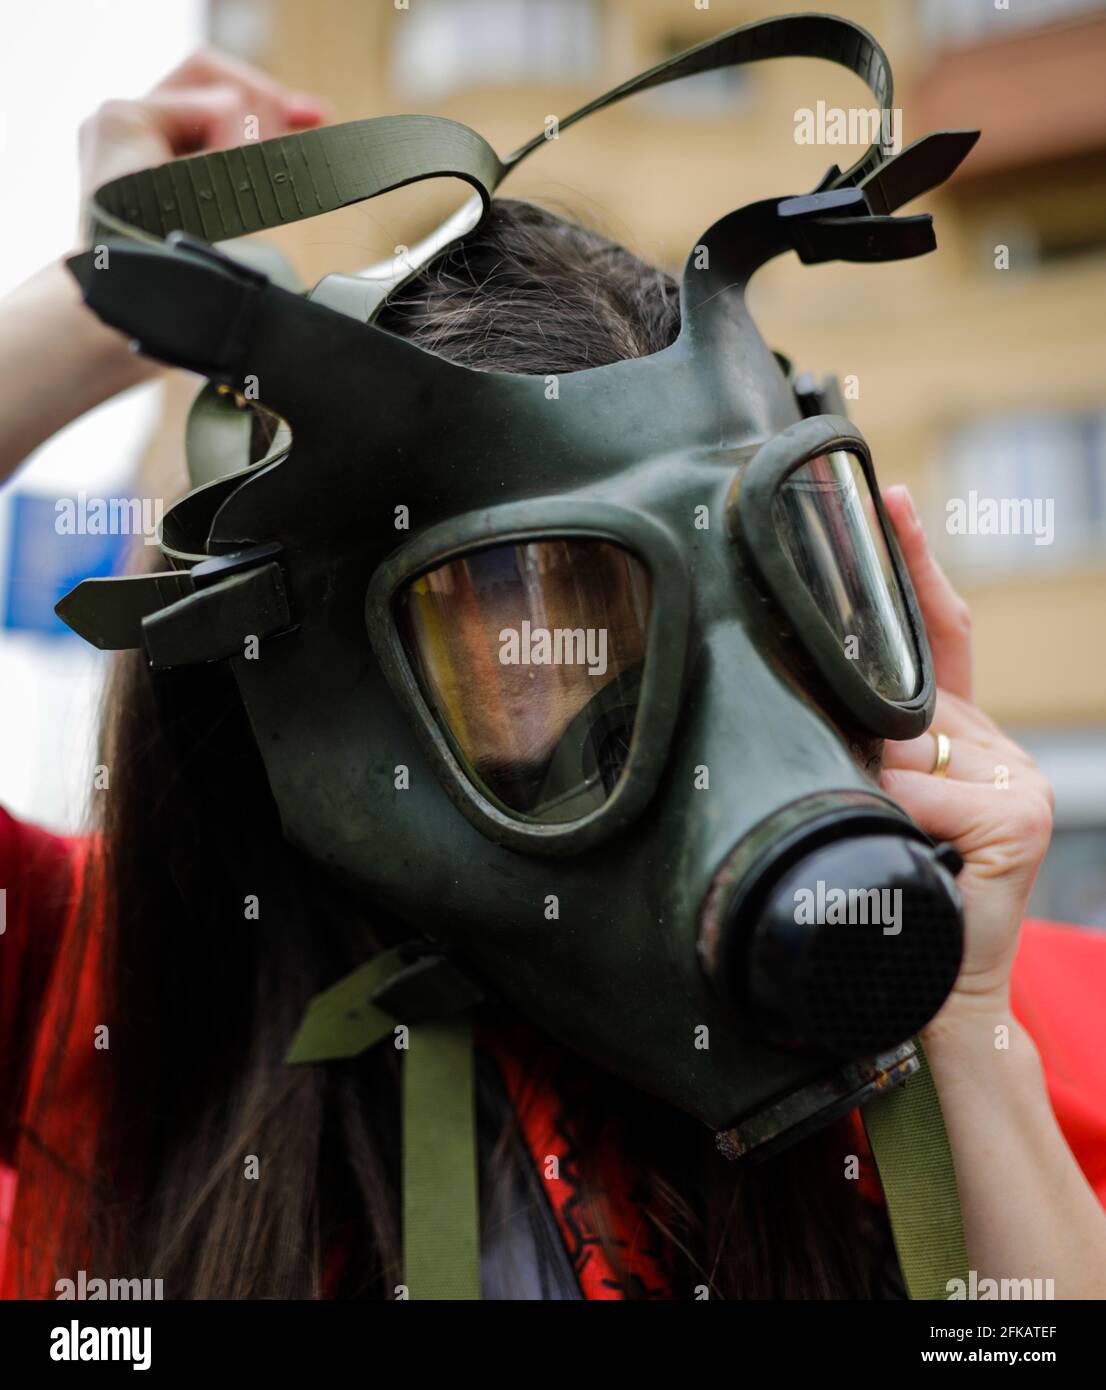 Shallow depth of field (selective focus) image with an old and worn out military gas mask without filters on the face of a woman. Stock Photo